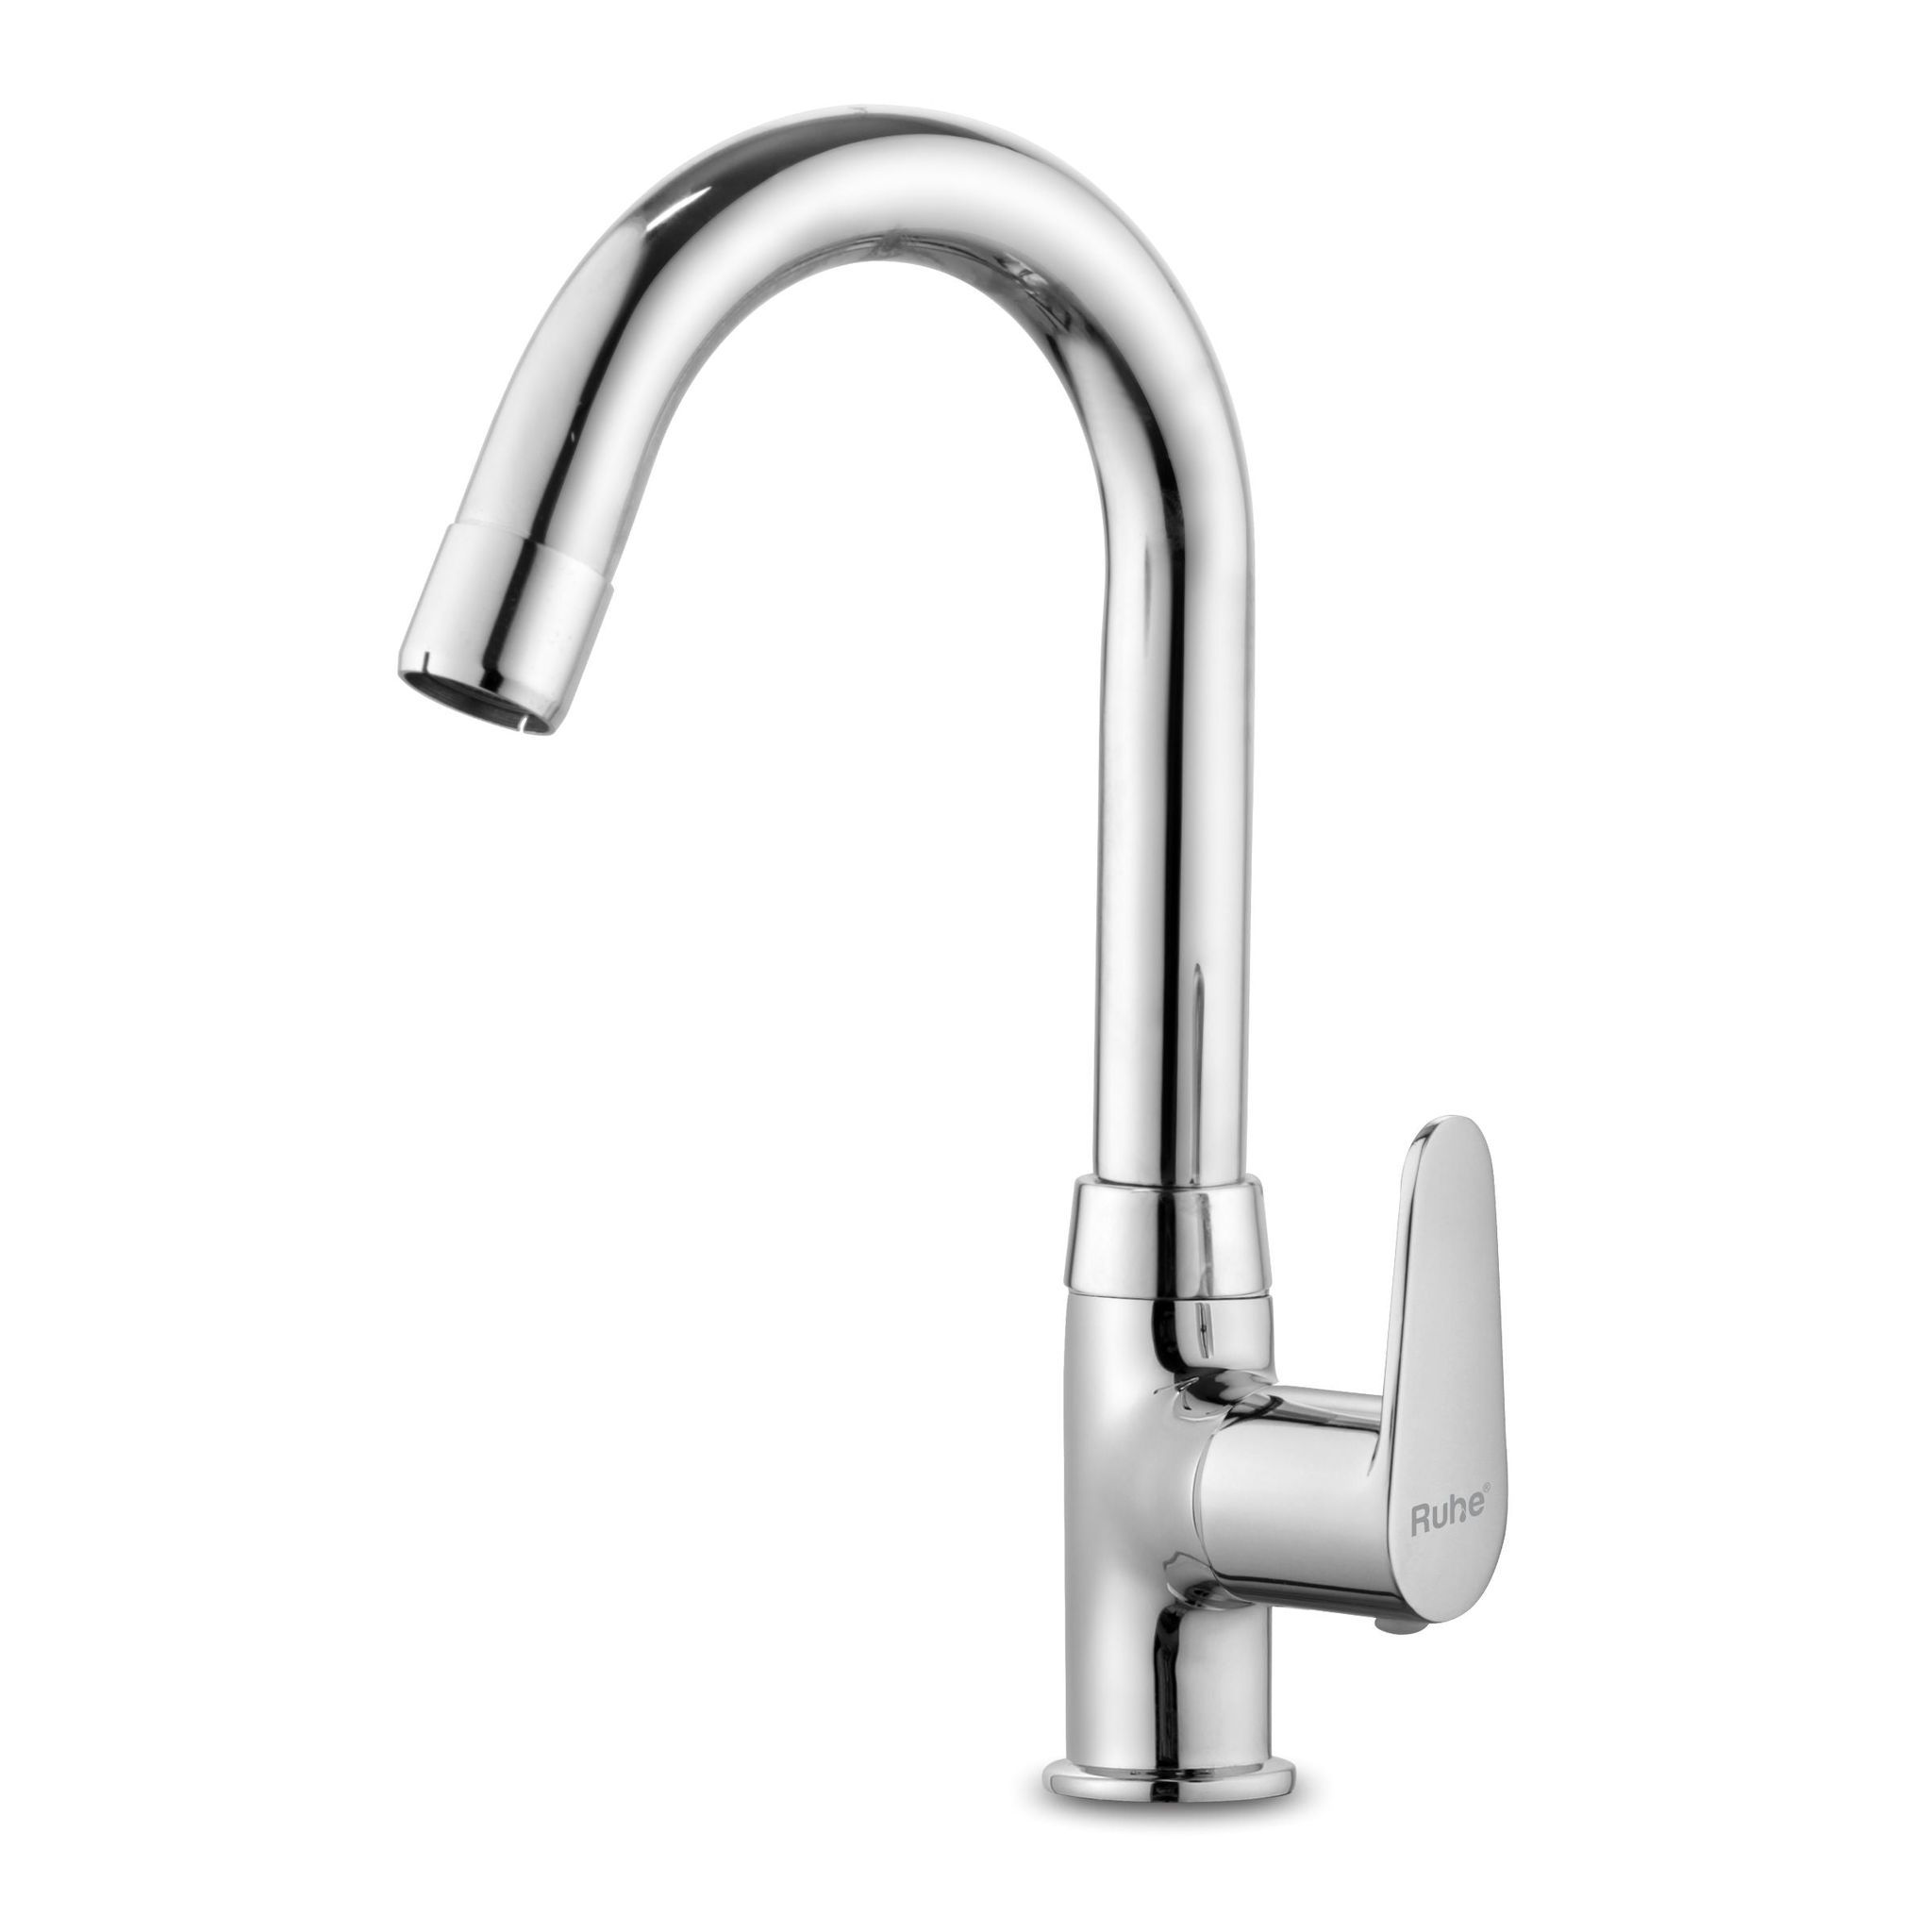 Eclipse Swan Neck Brass Faucet with Small (12 inches) Round Swivel Spout - by Ruhe®